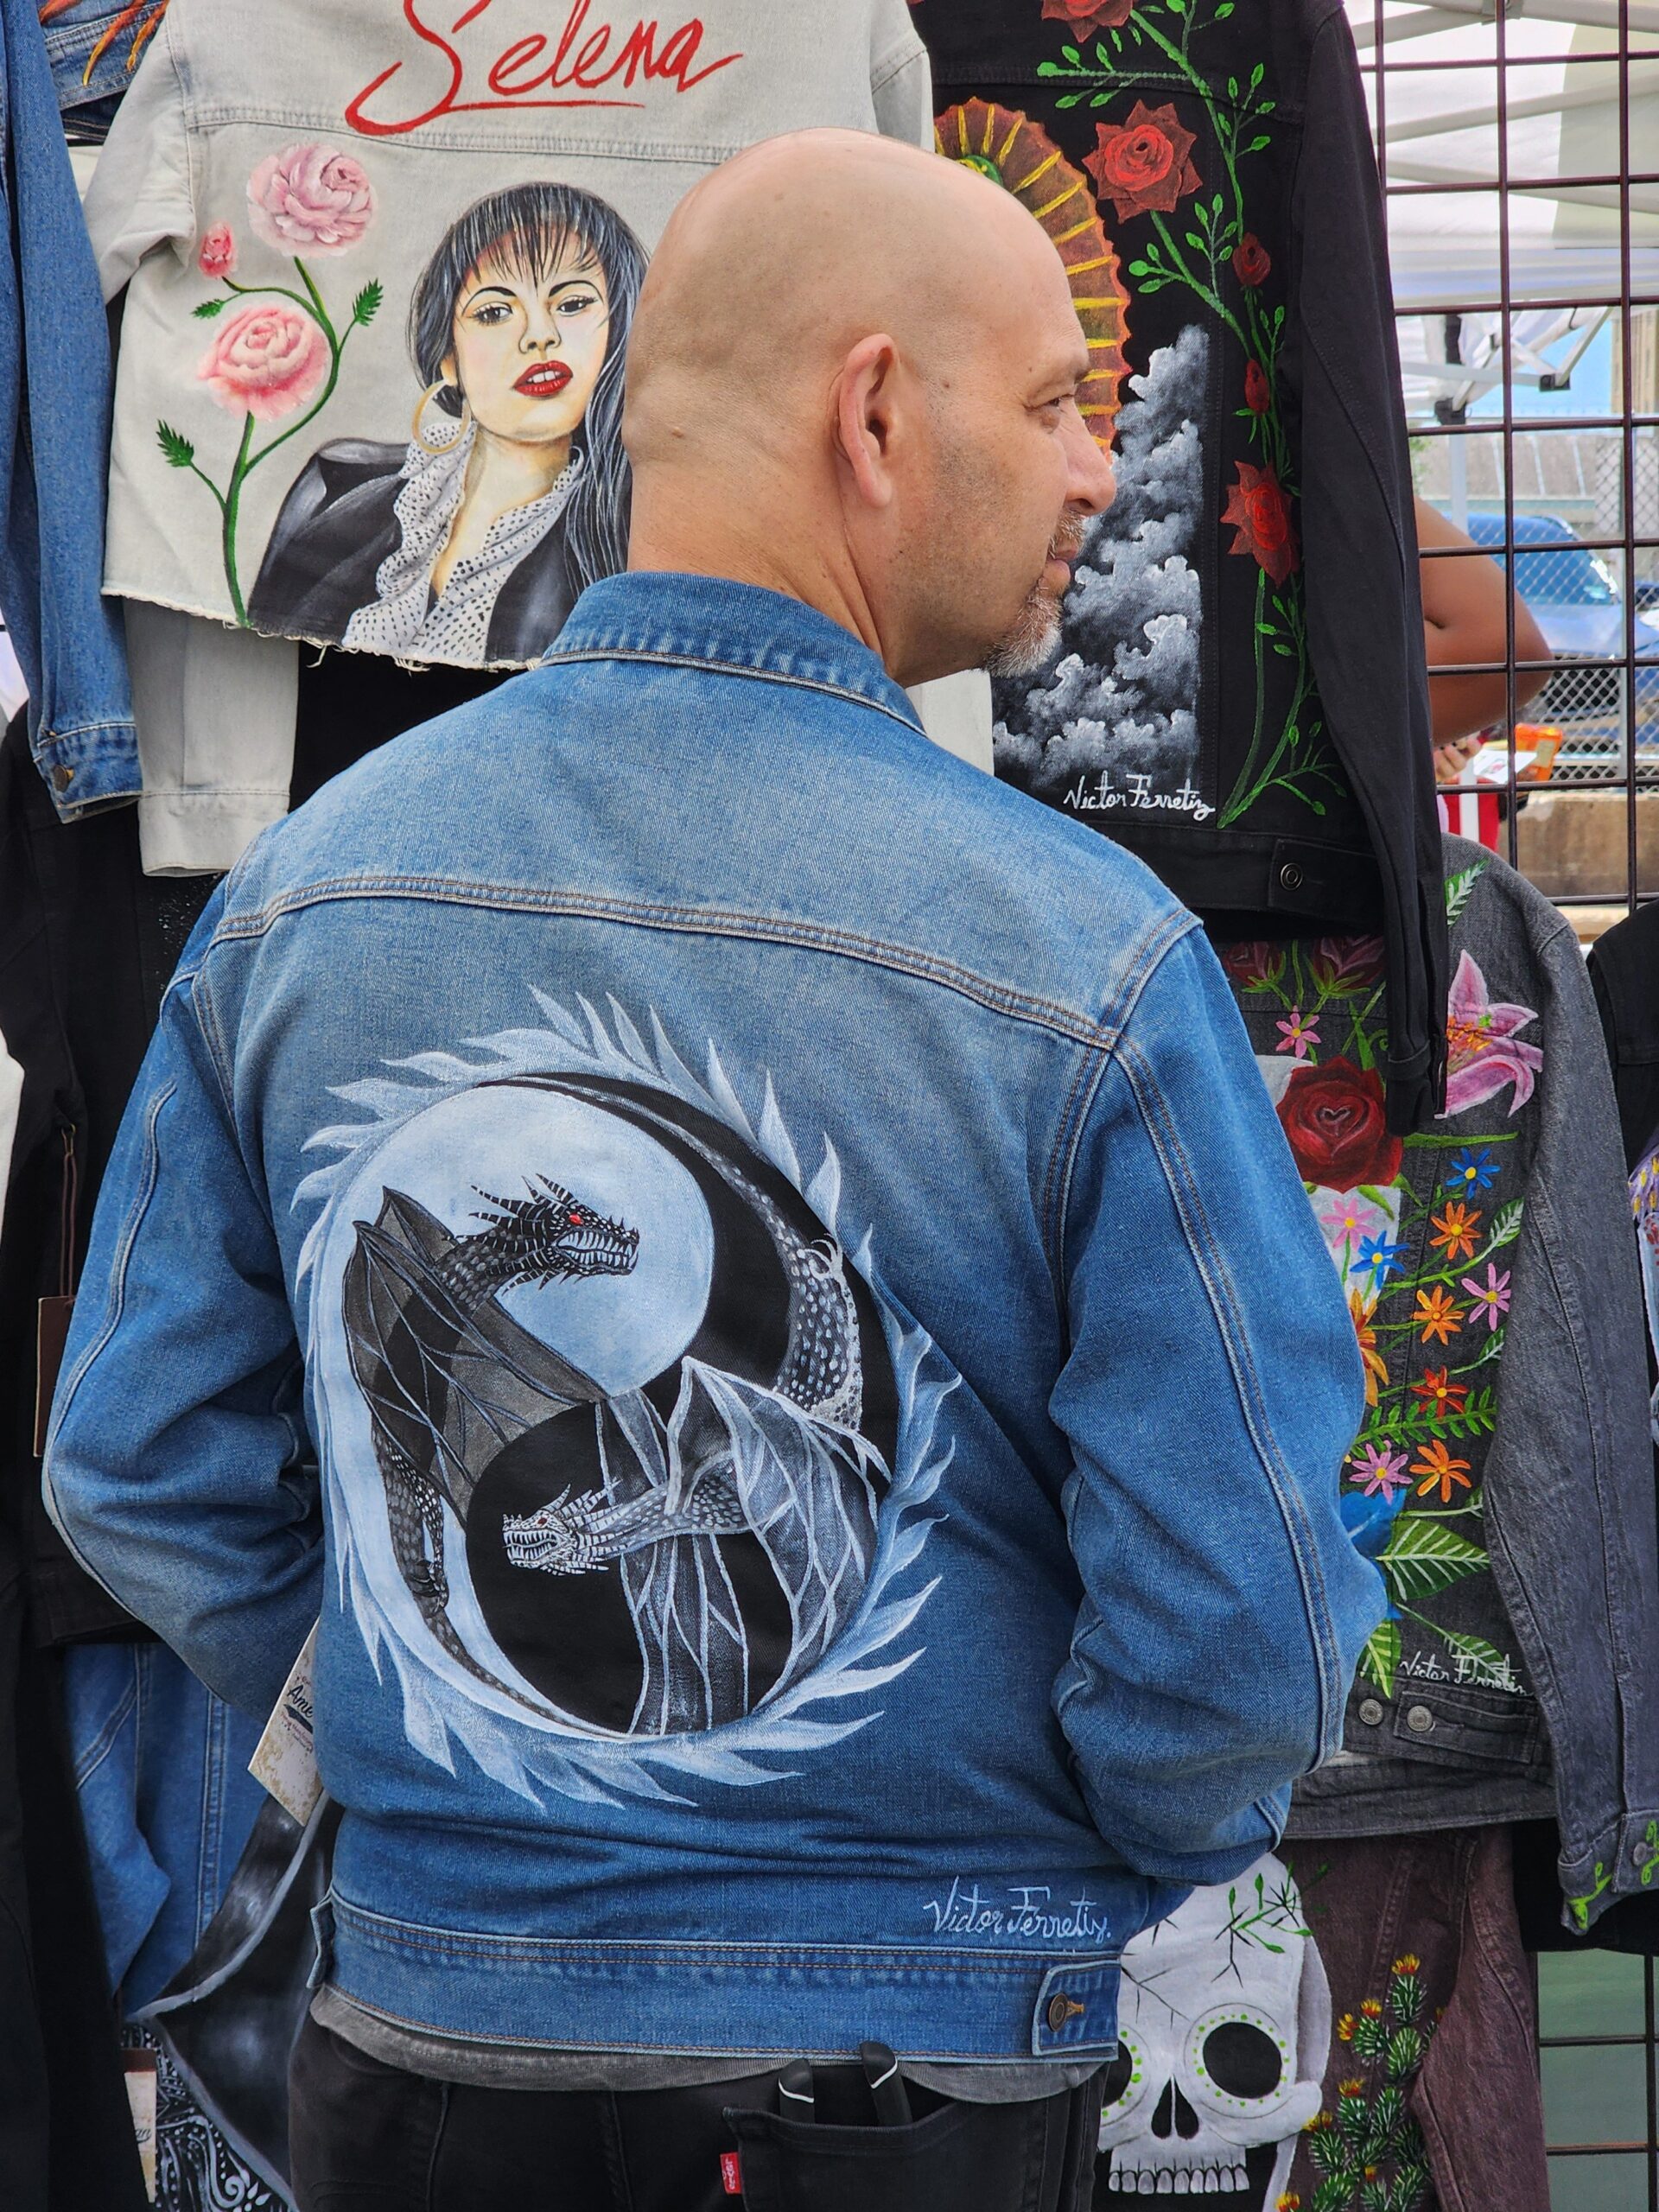 Handpainted brand new jacket. This jacket is heat pressed so you can wash it and dry it. Size: XL (men's)